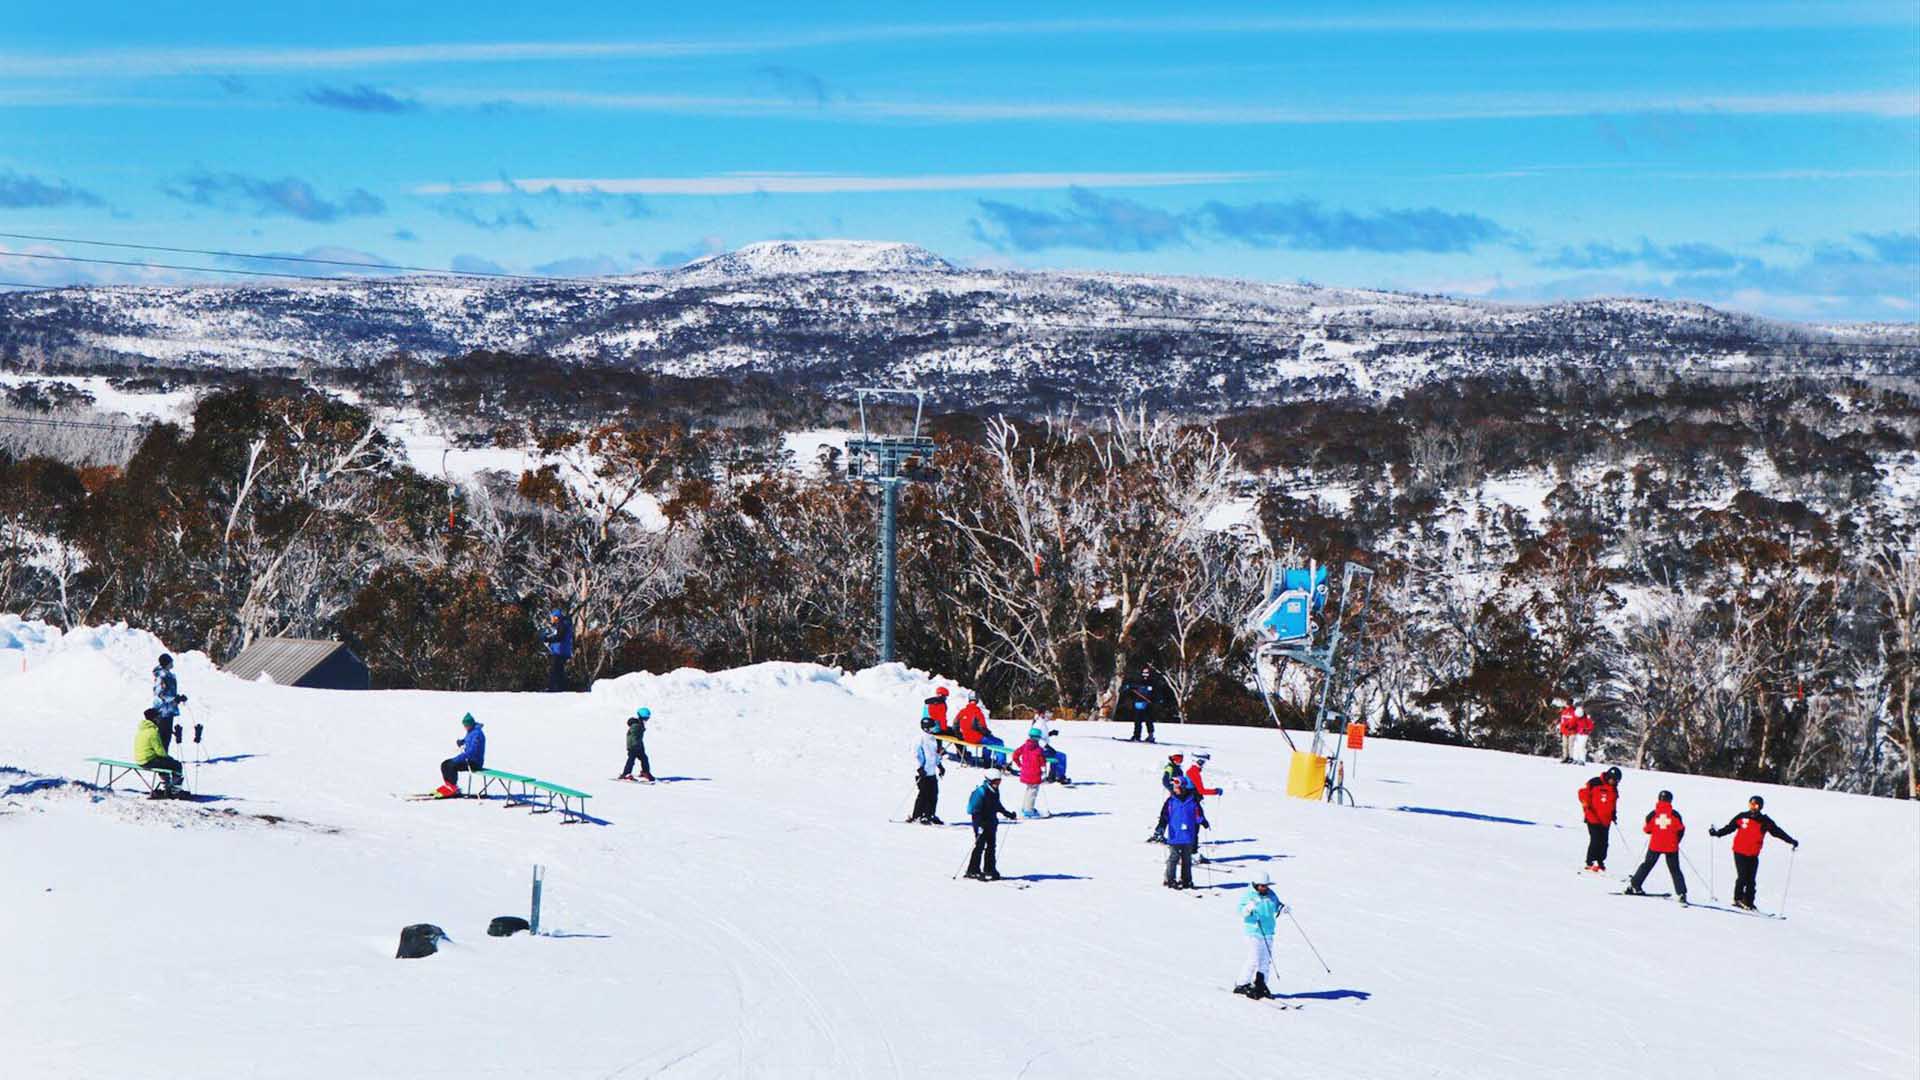 Selwyn Snow Resort's Rebuild Will Include a Skating Rink, Bumper Cars and Mini Enchanted Village